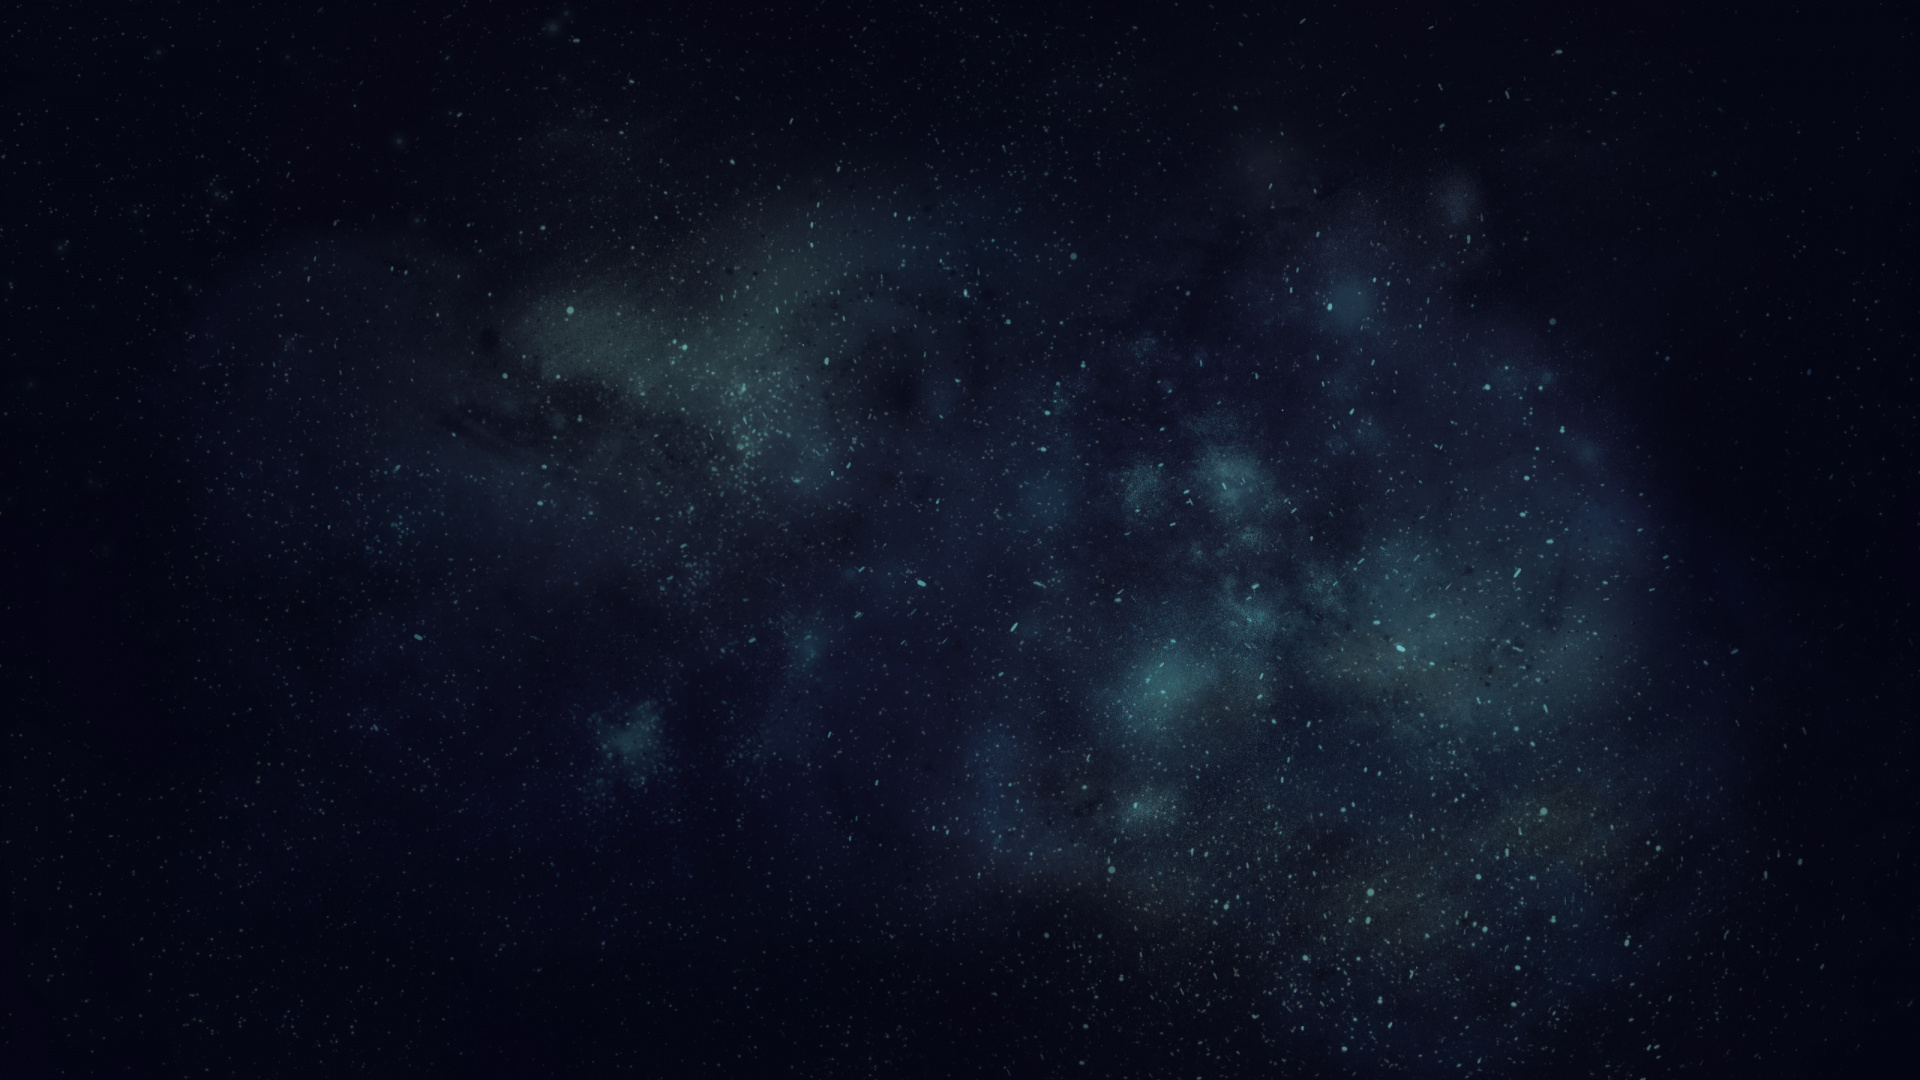 Blue and Black Starry Night. Wallpaper in 1920x1080 Resolution